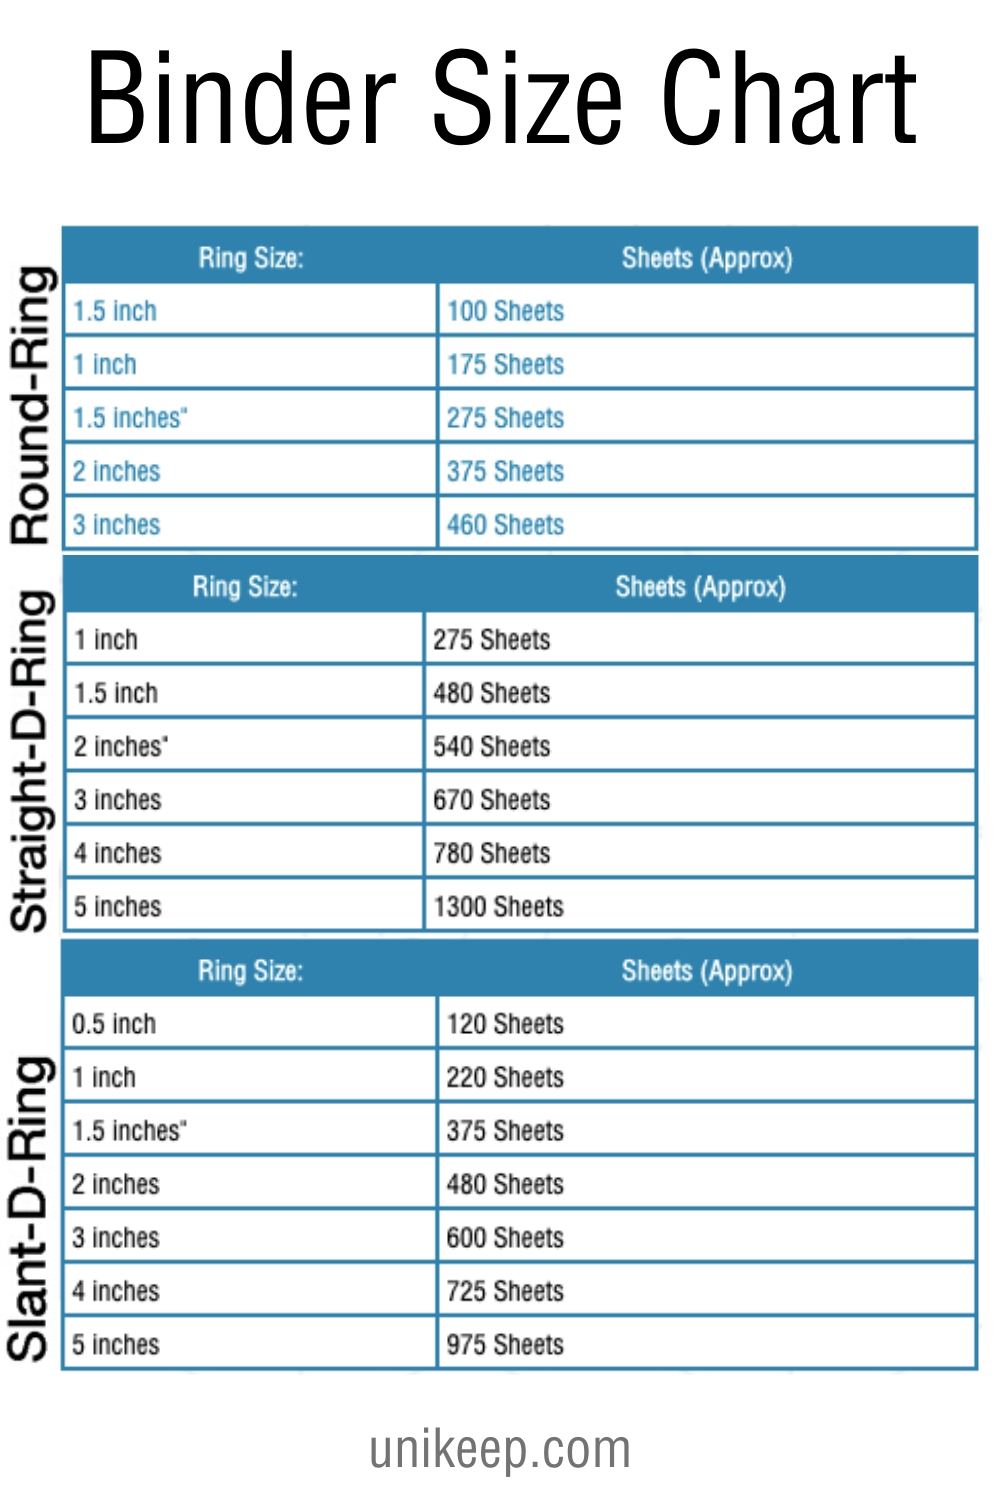 Binder Size Chart For 3 Ring Binders In 2020 | Binder Sizes